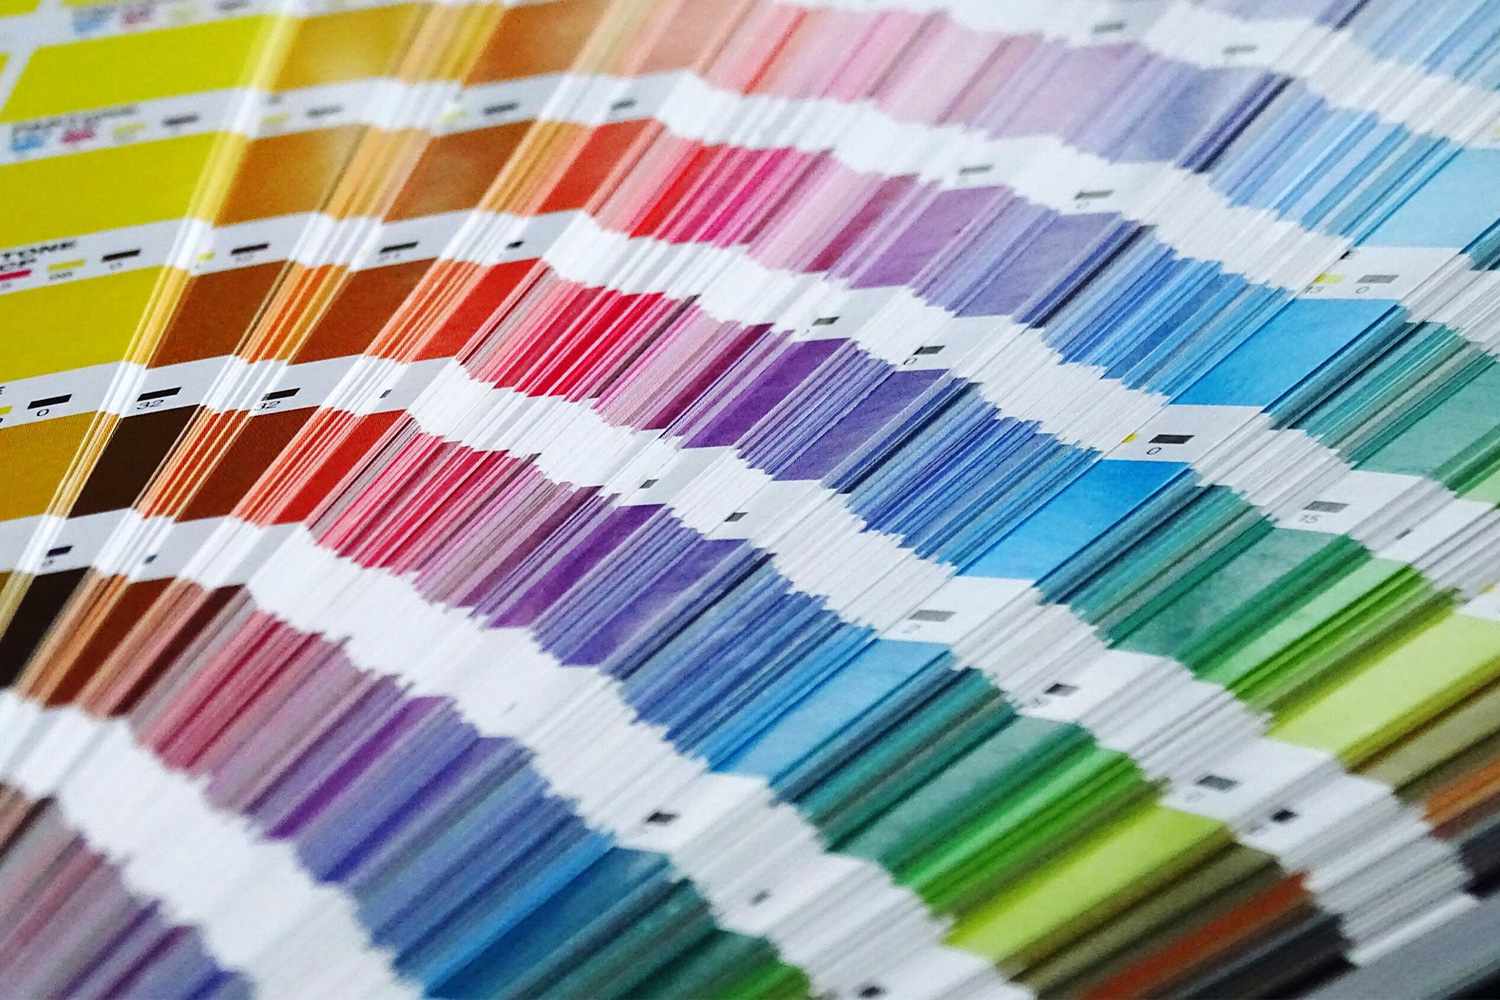 Collection of pantone strips to show color options